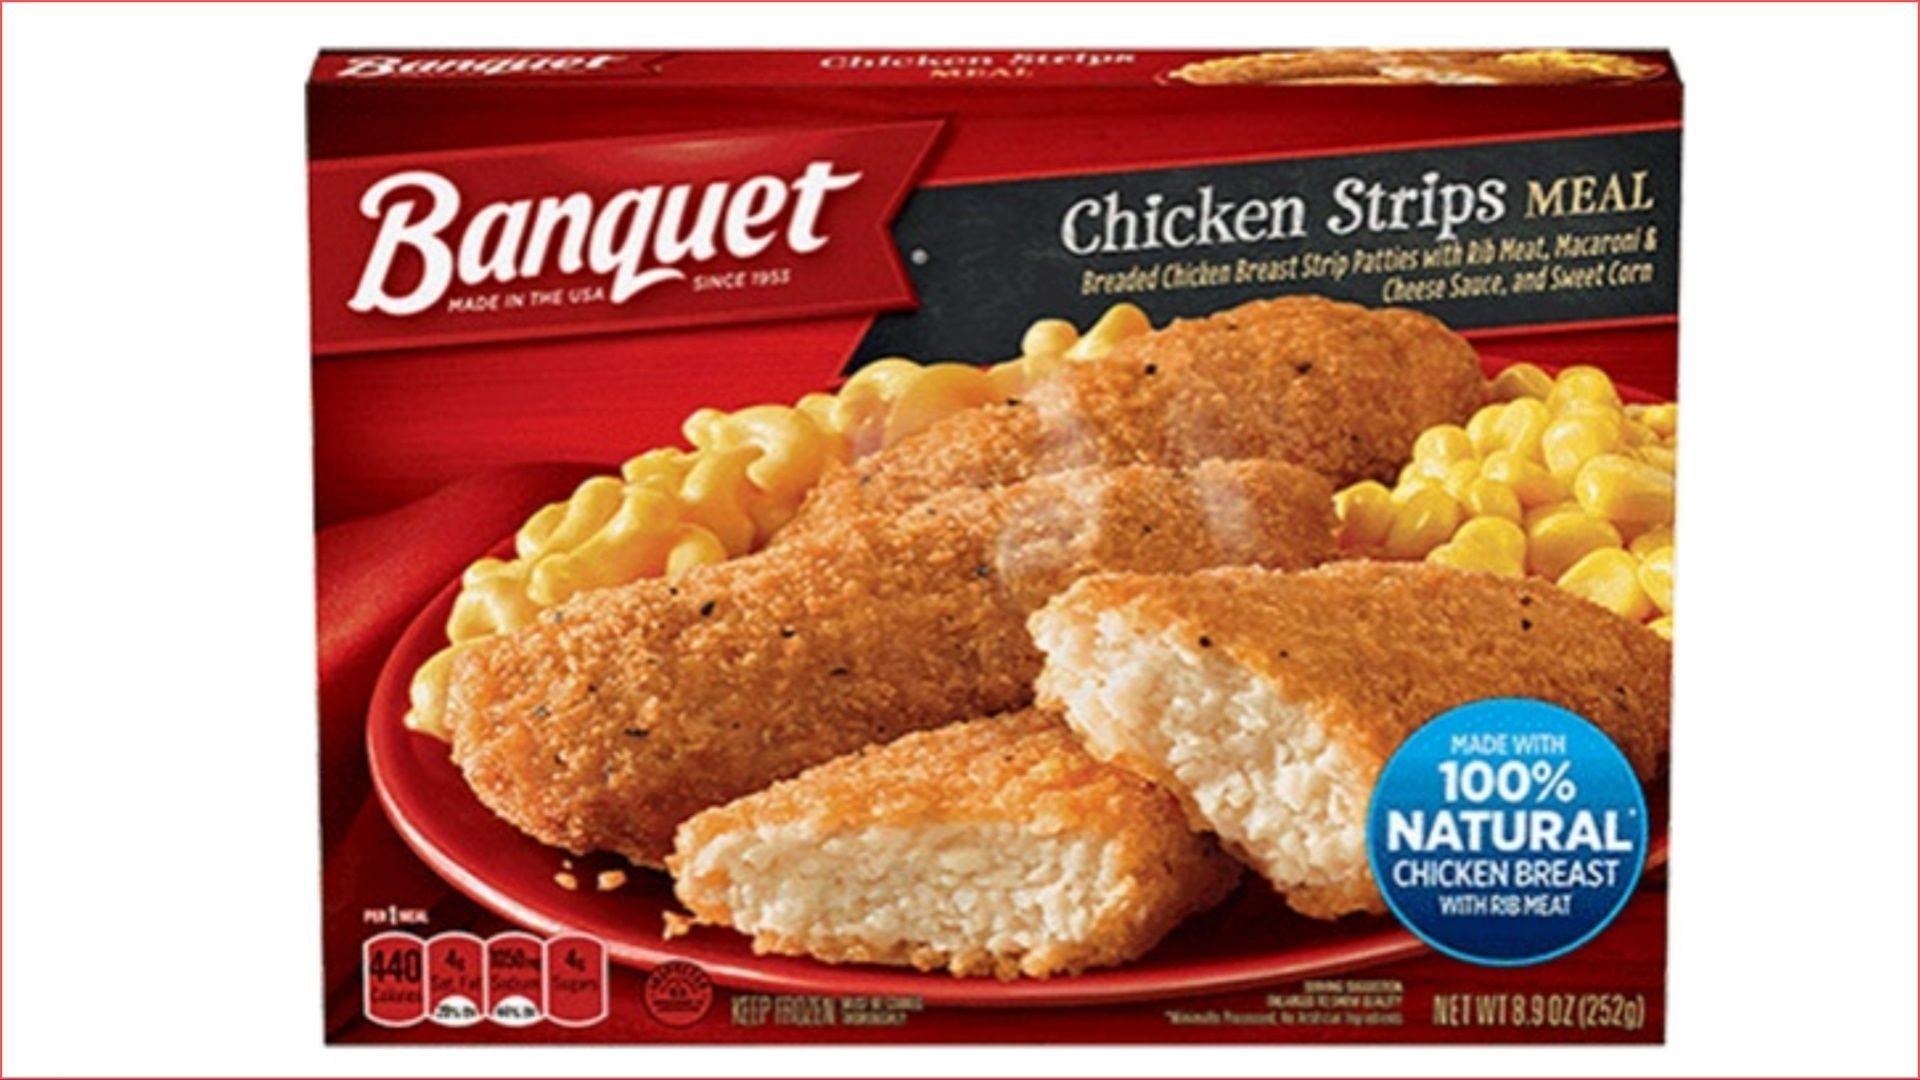 Banquet Chicken Strips meals recall: Reason, affected lot numbers, and ...